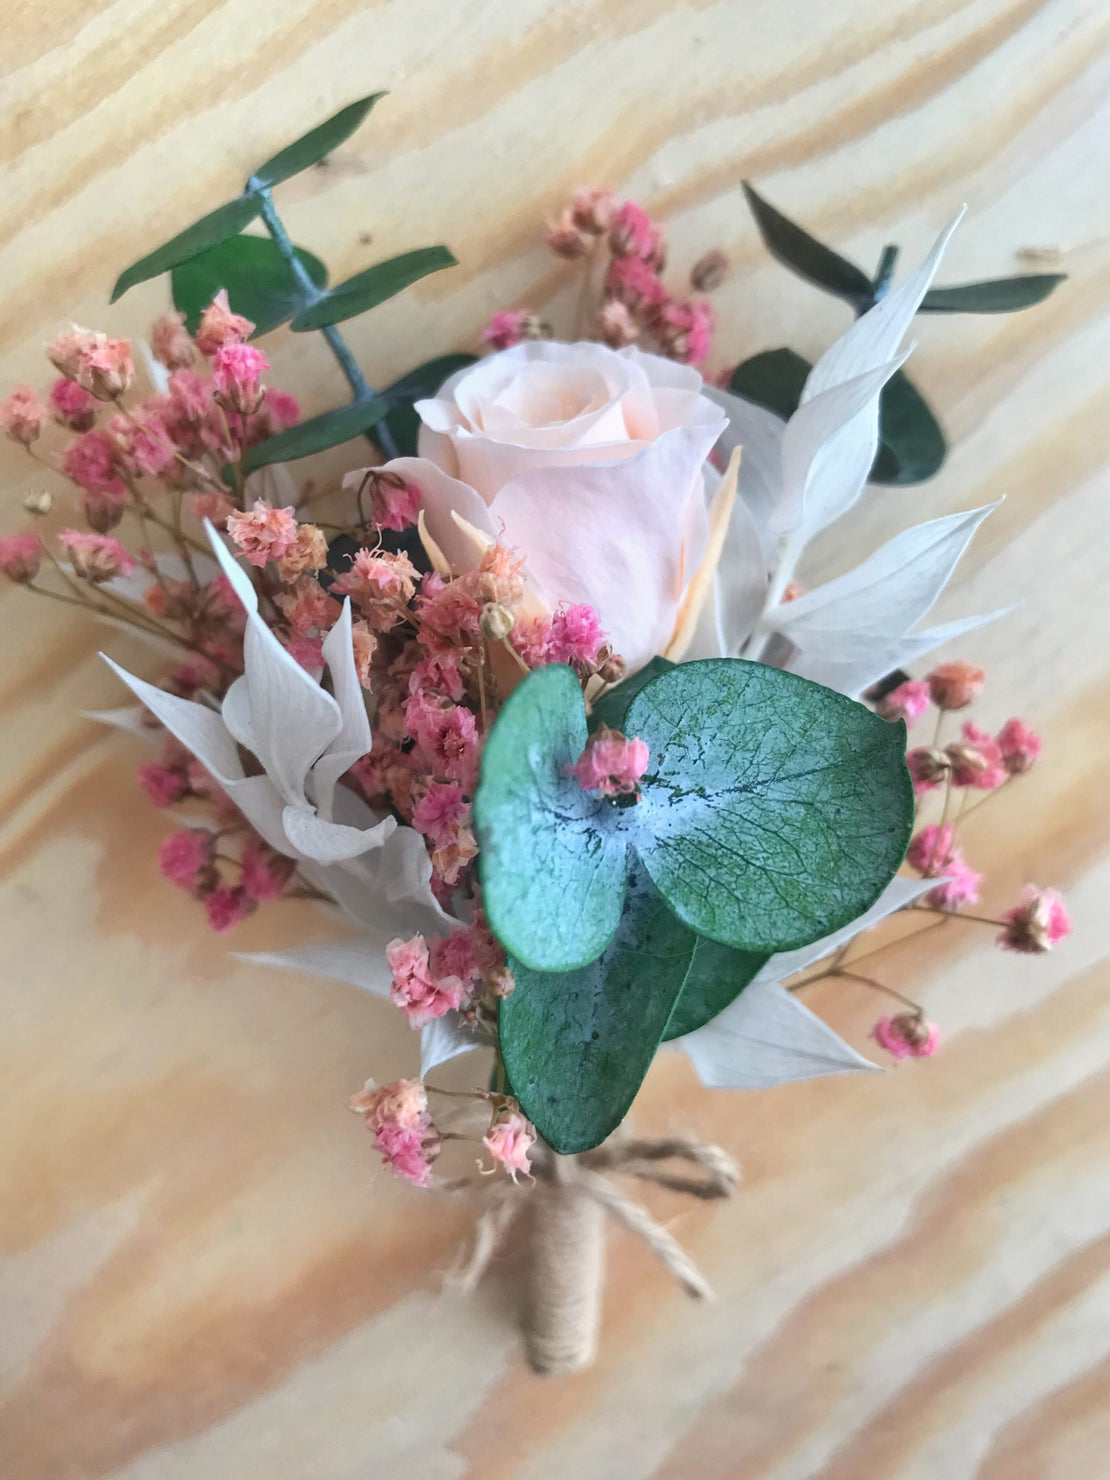 Dried flower wedding boutonniere with eternal rose, pink gypsophila and stabilized eucalyptus